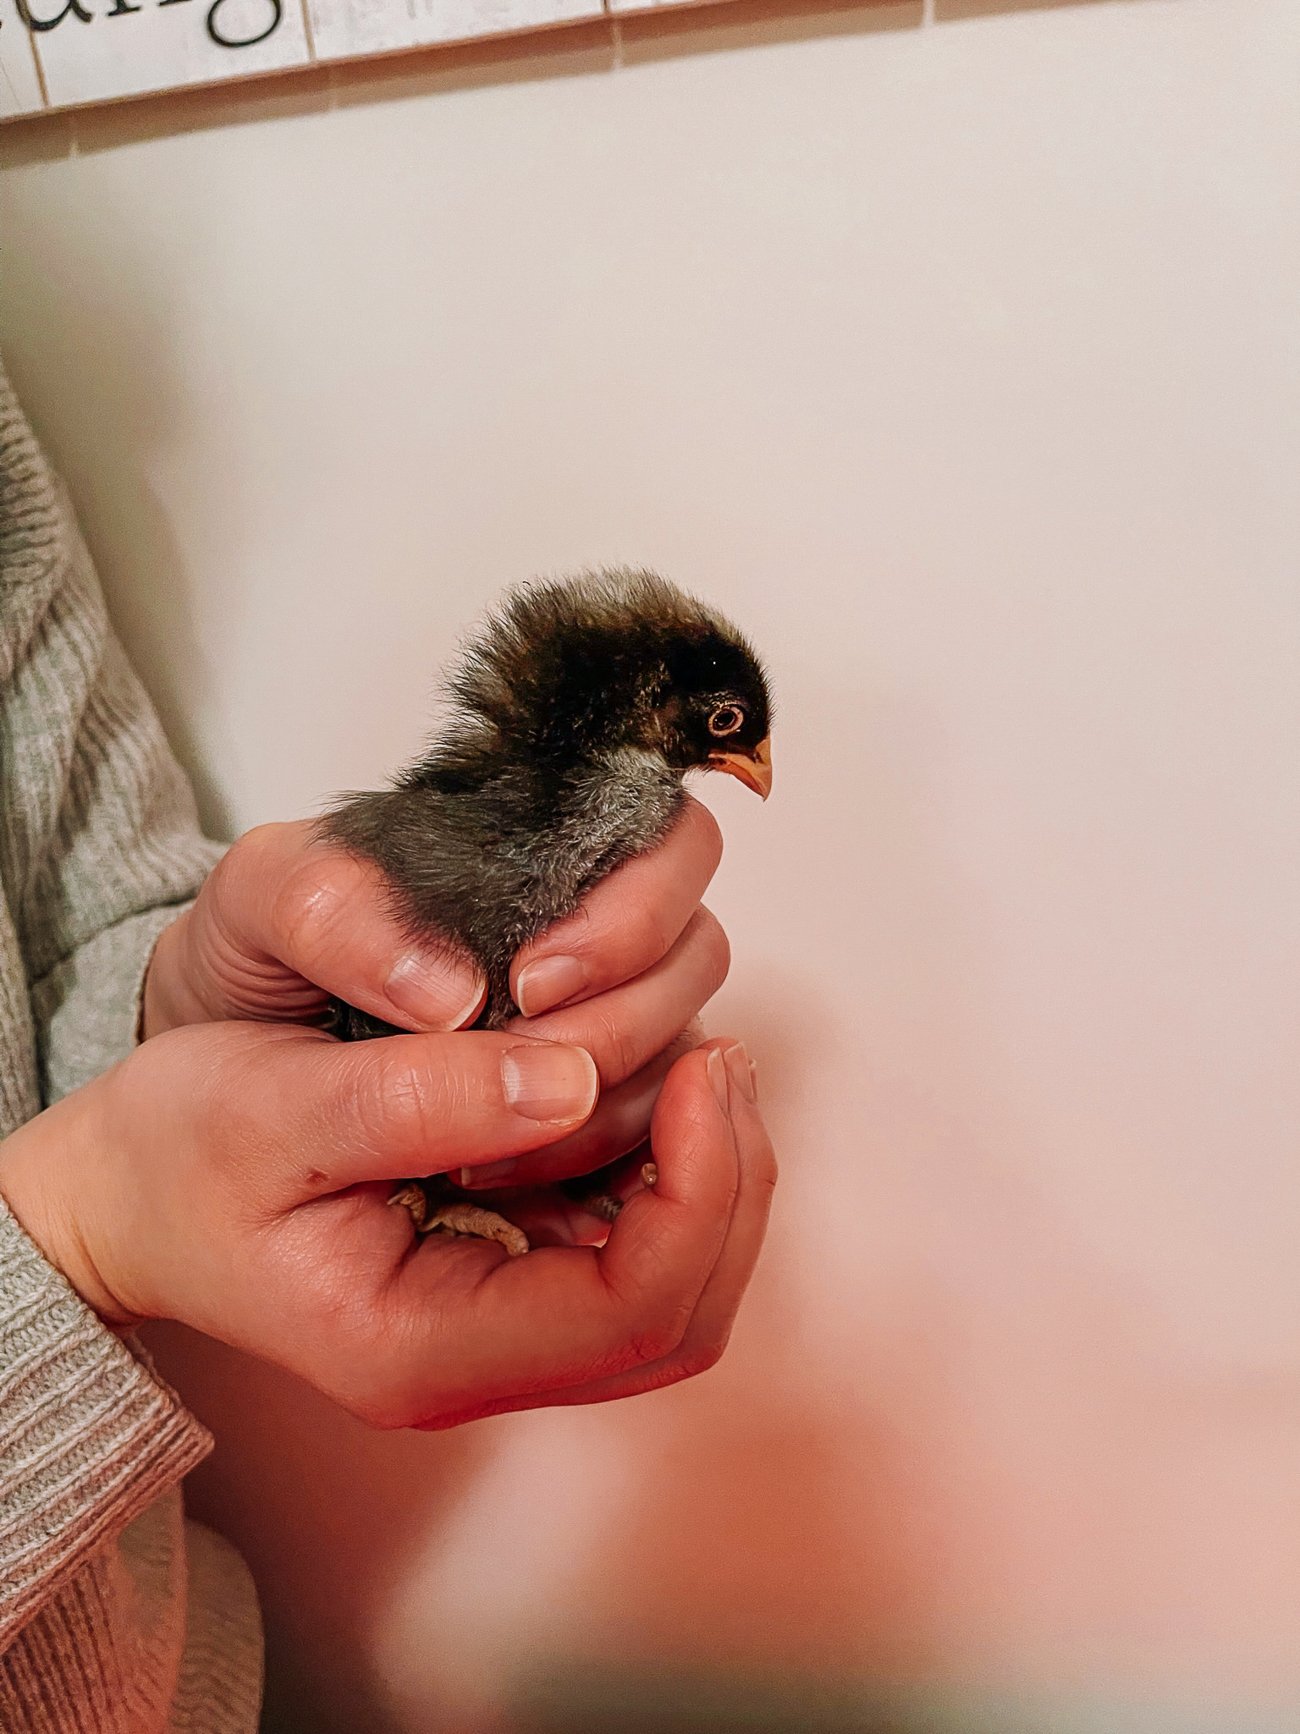 holding baby chick